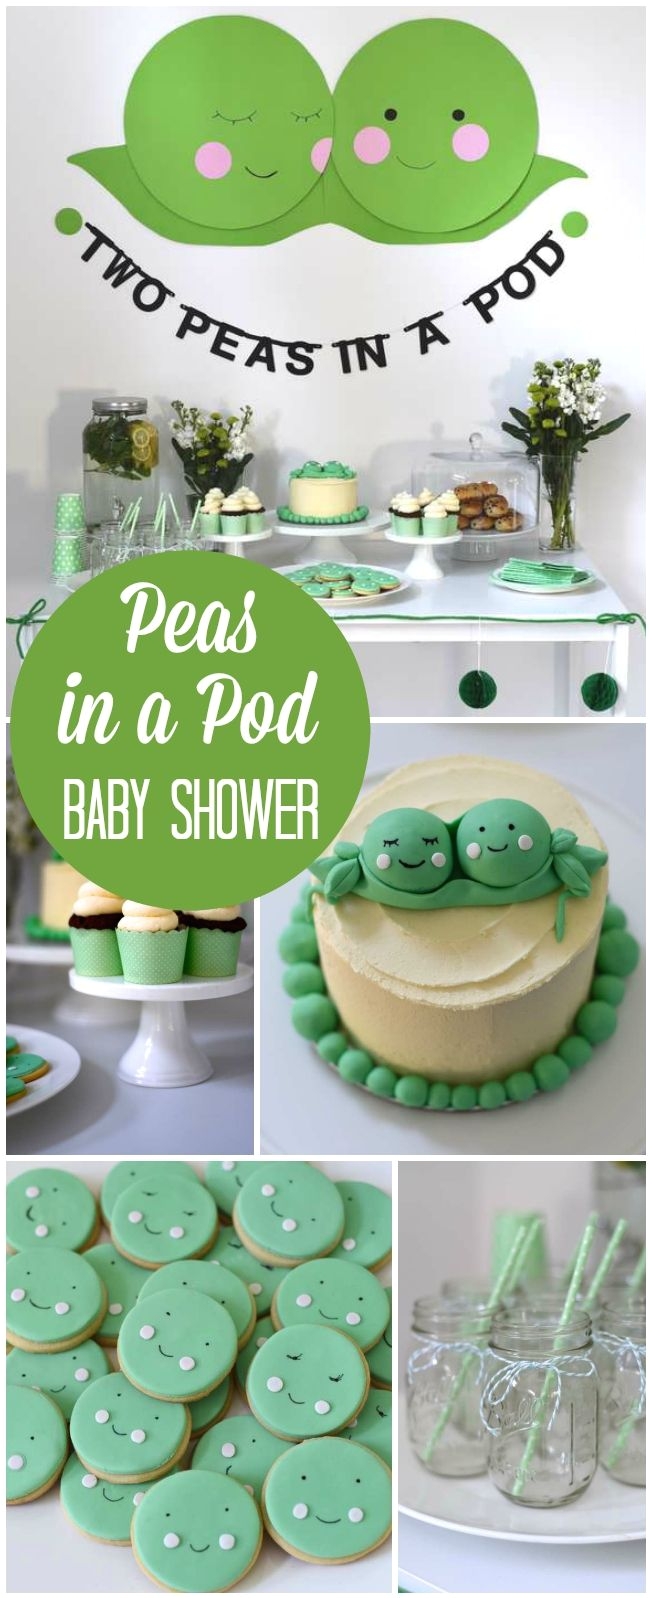 Two Peas In A Pod Twin Baby Shower Decorations 25 Best Twins and Multiples Images by Moments to Treasure Greetings